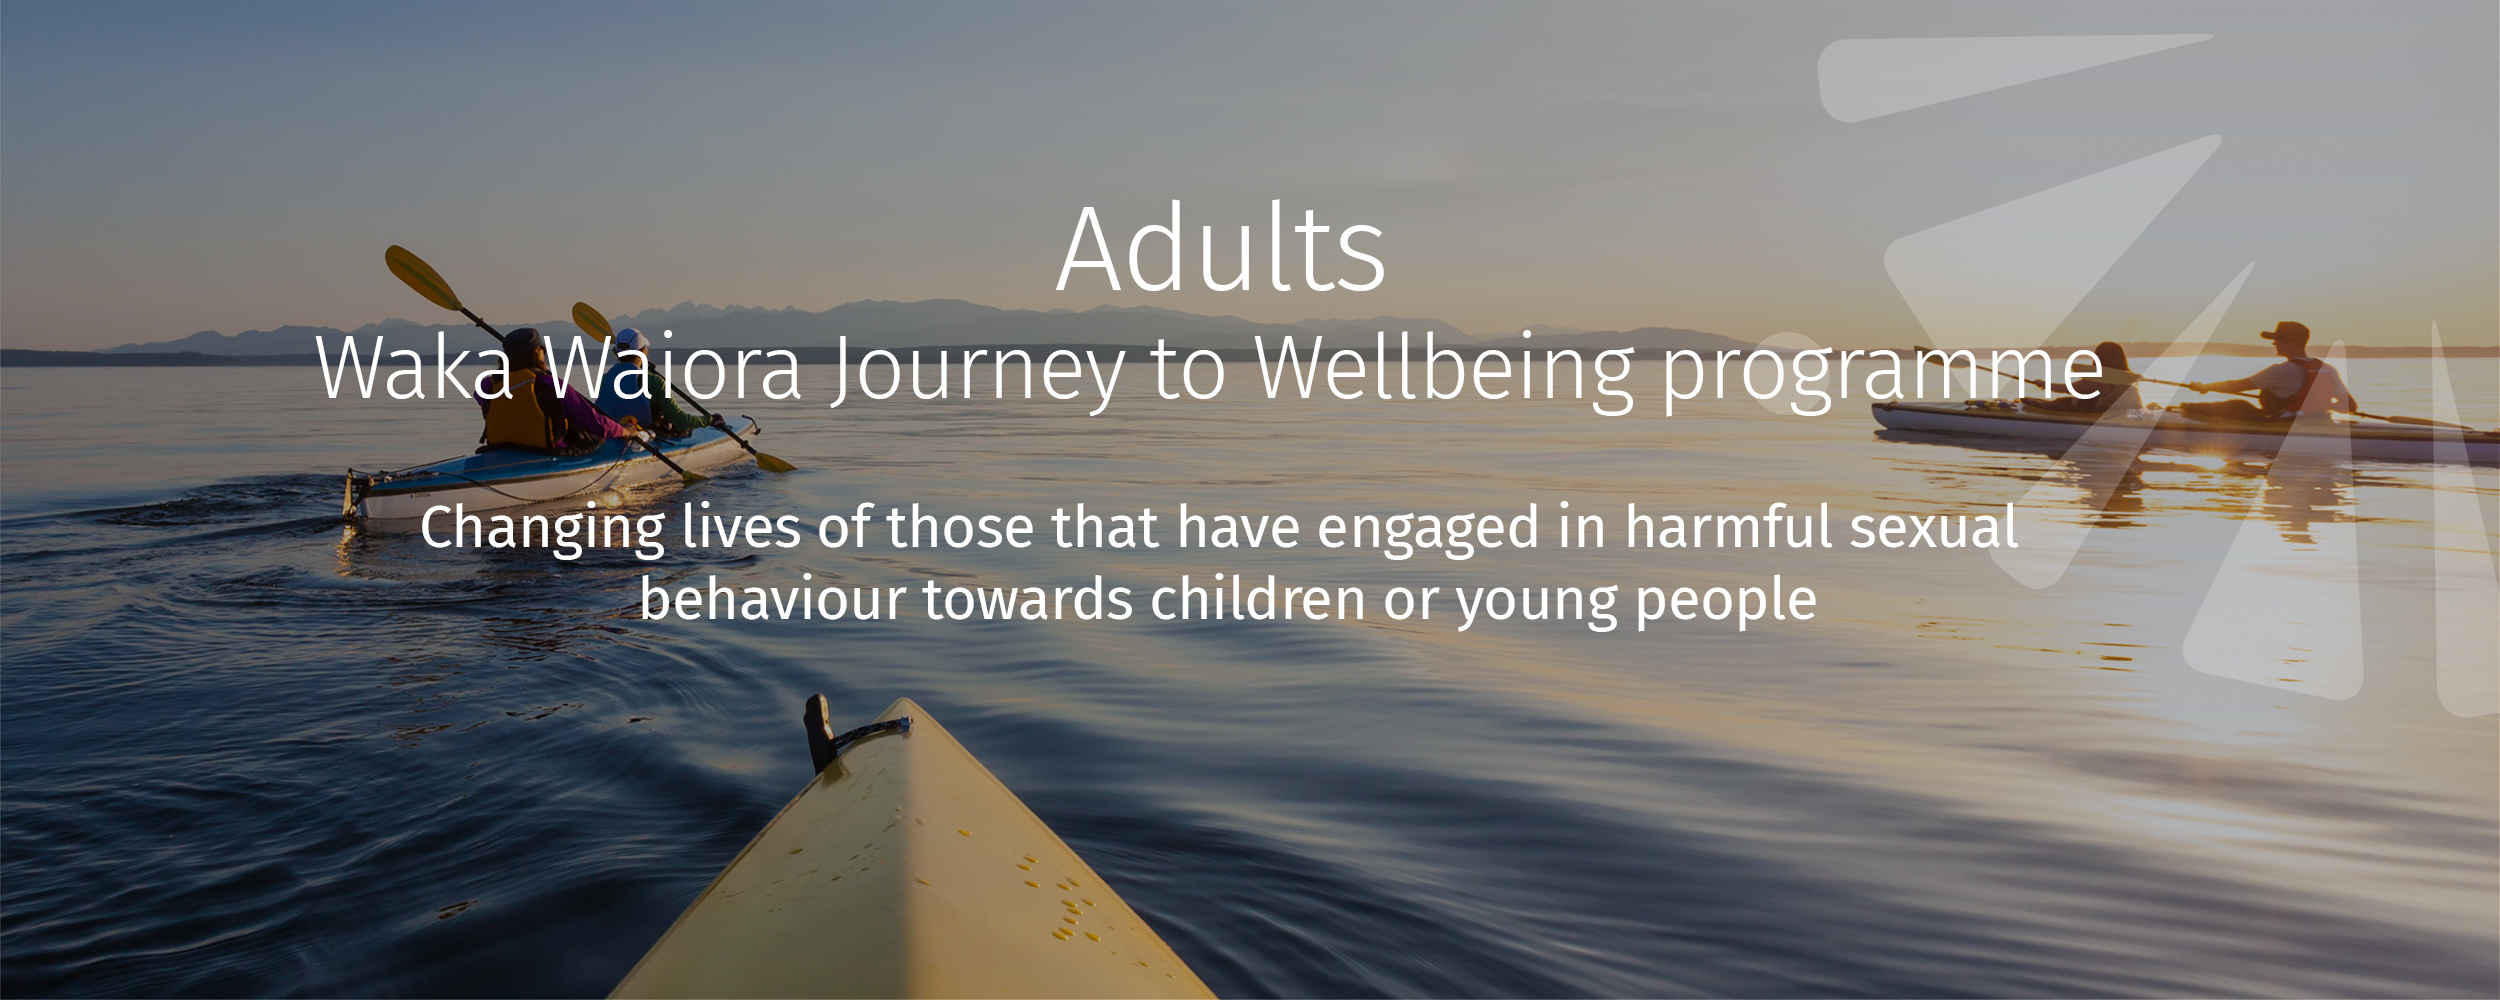 Changing lives of those that have engaged in harmful sexual behaviour towards children or young people